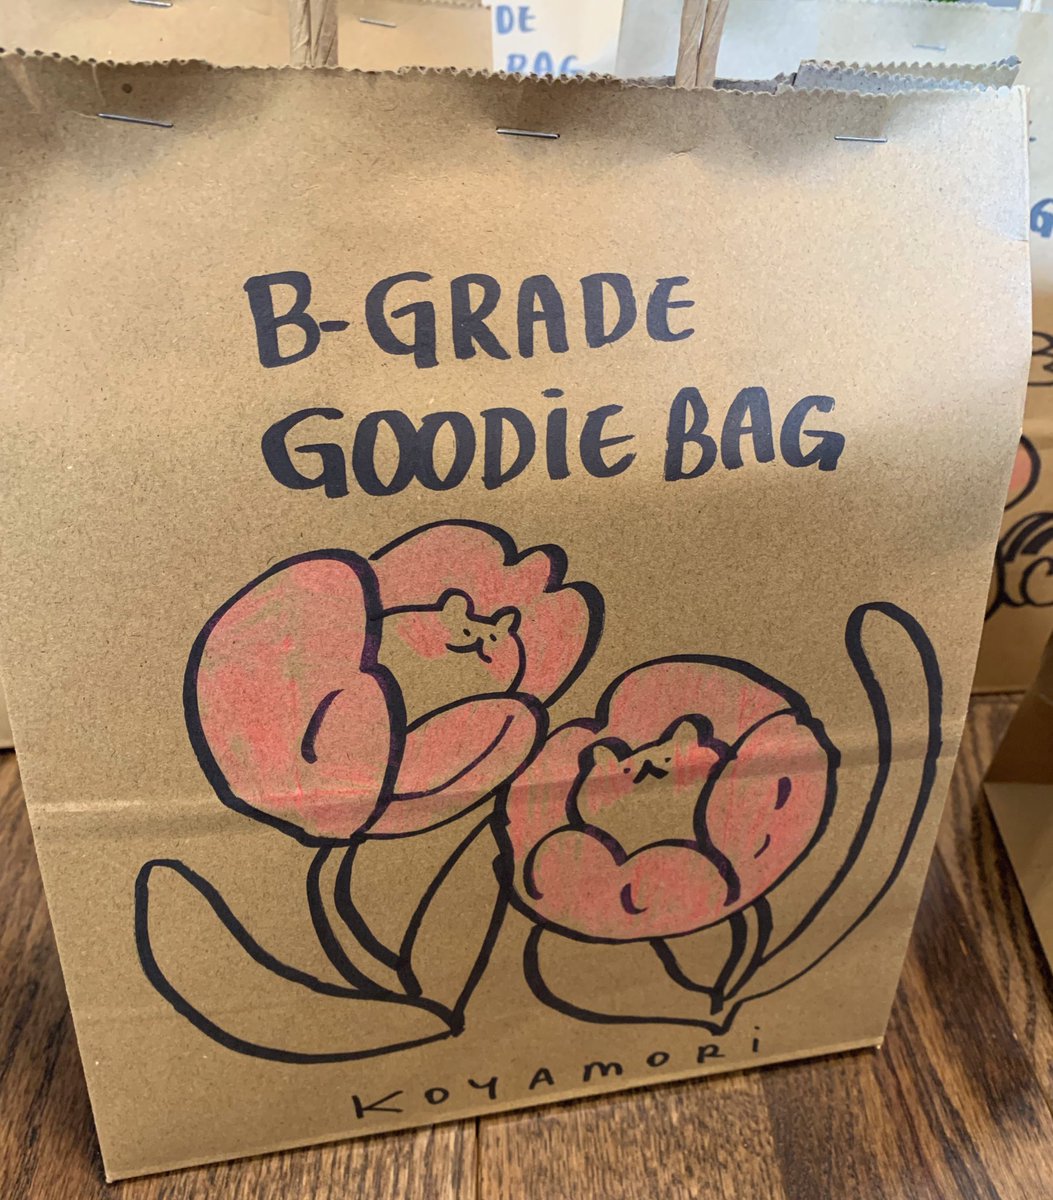 B-grade goodie bags for AN First come first serve ($50)